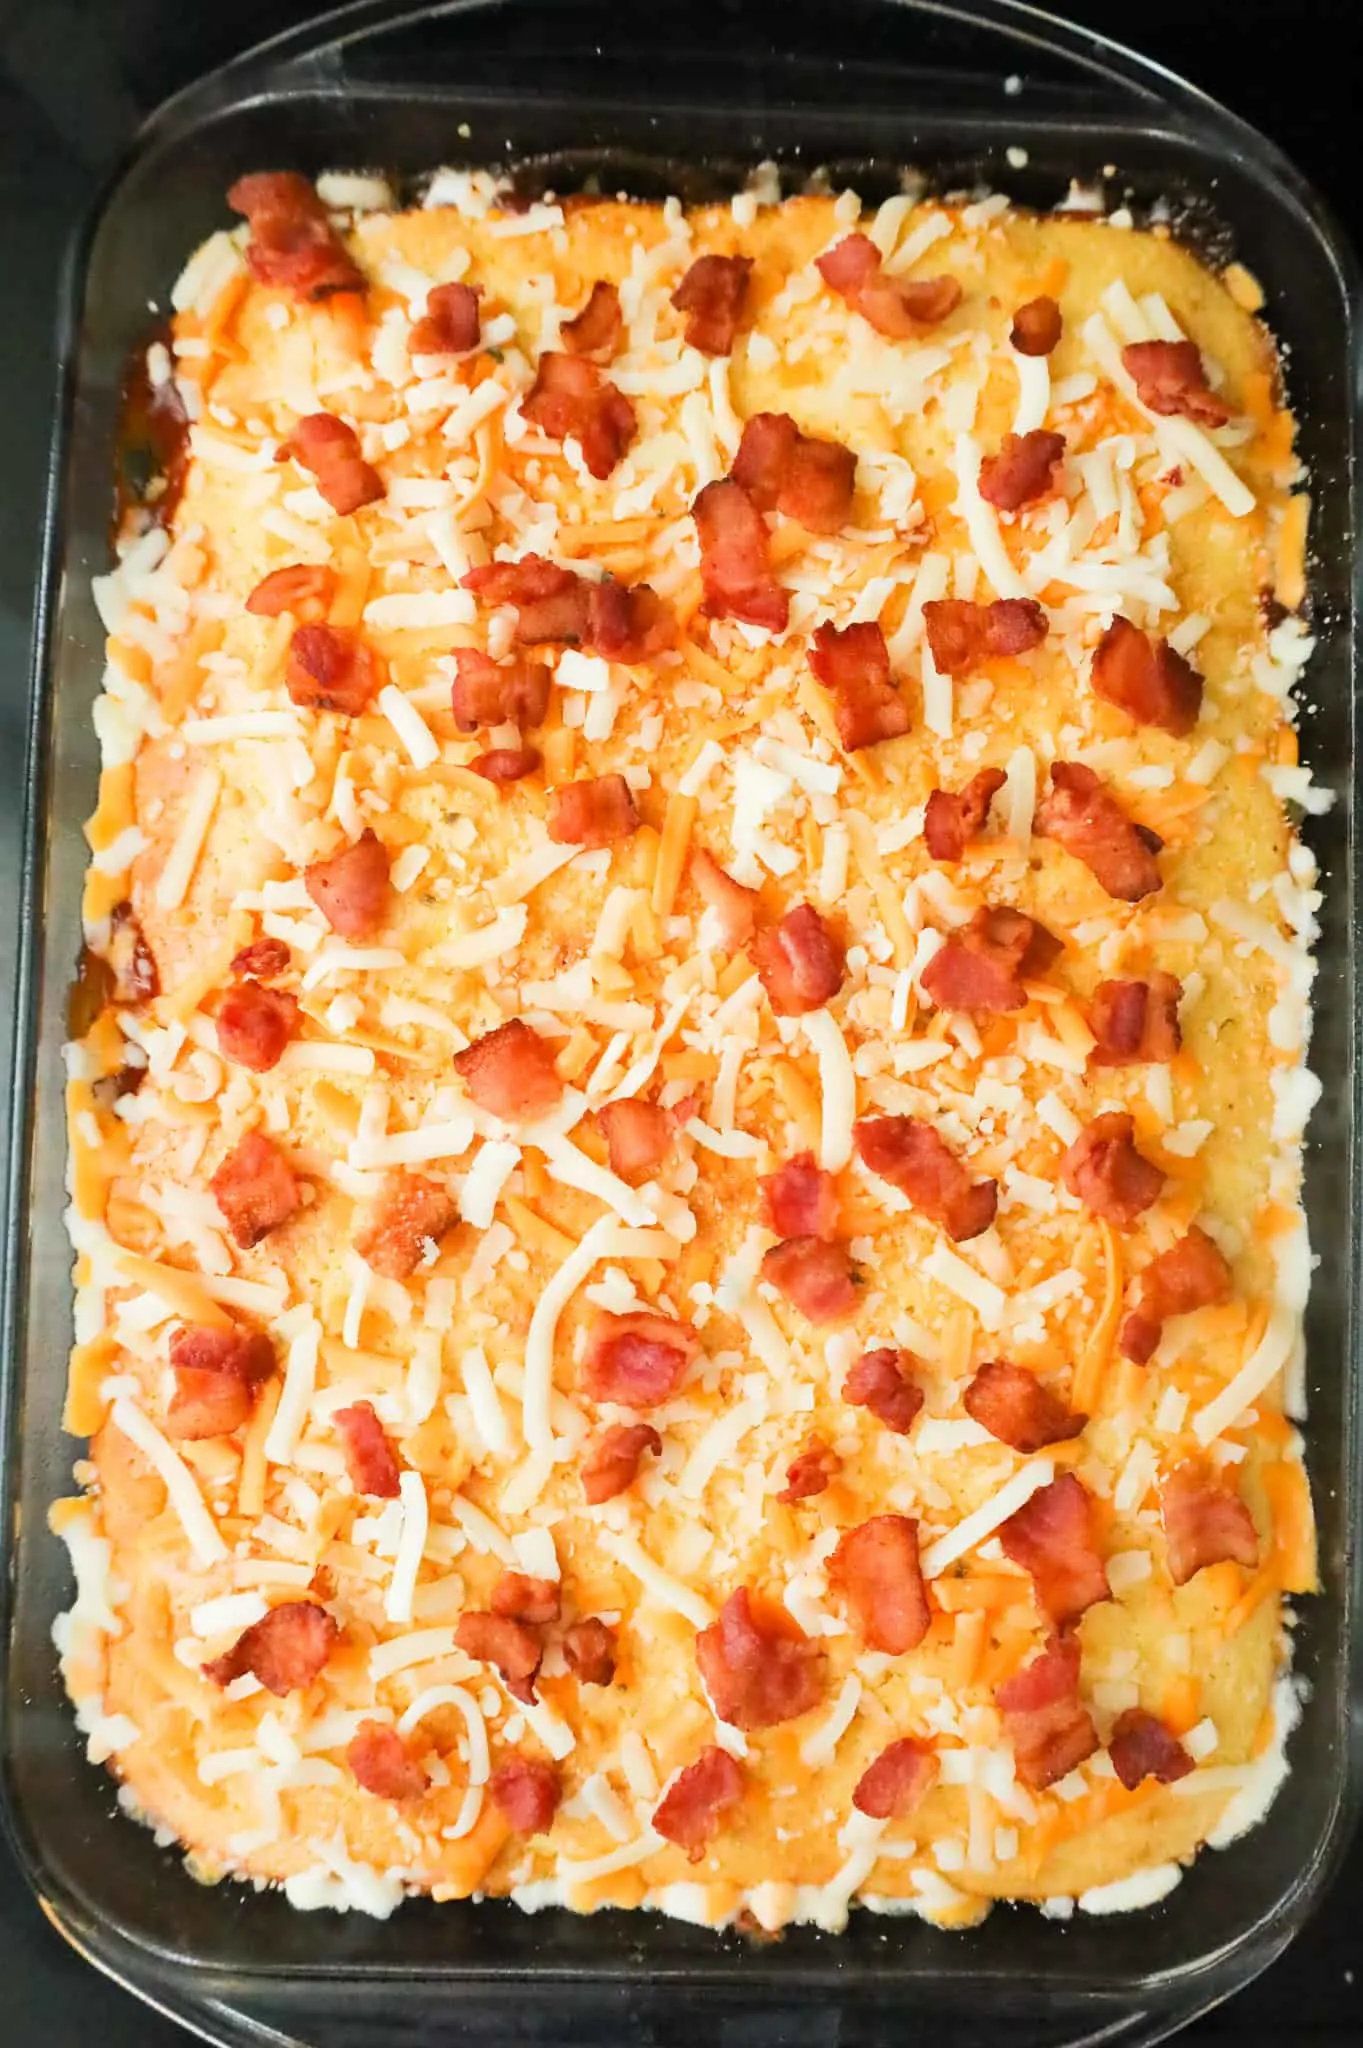 crumbled bacon and shredded cheese on top of cornbread casserole